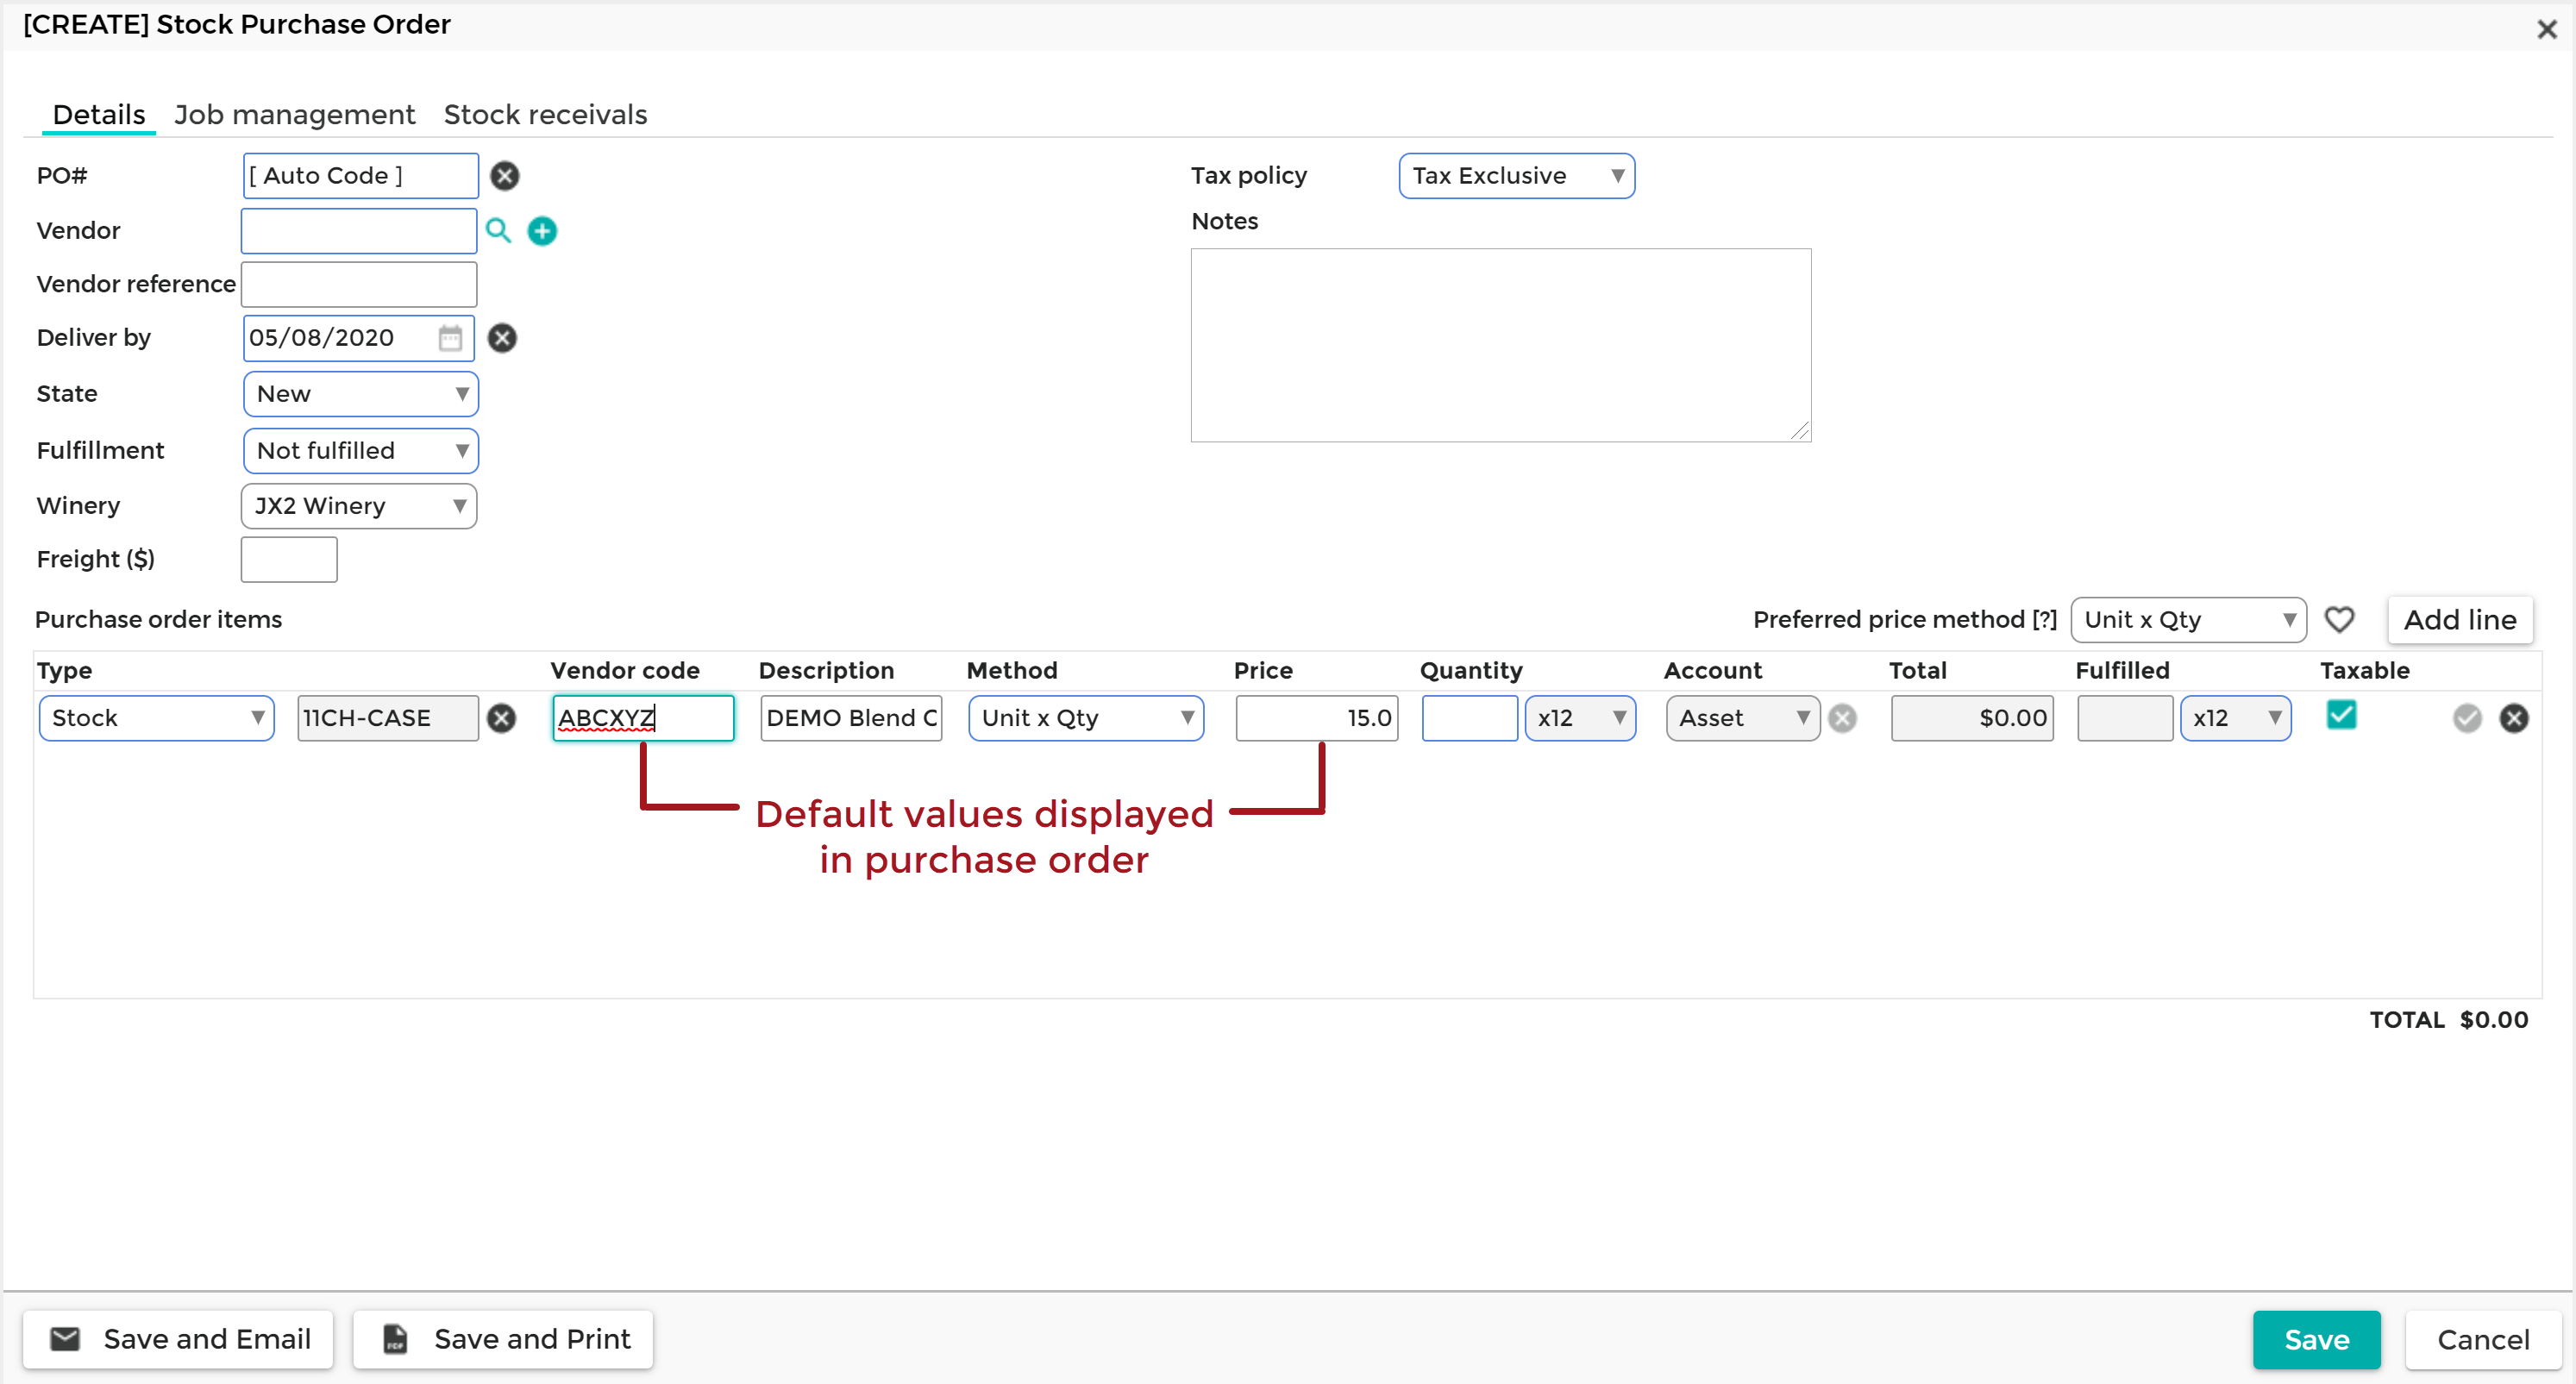 Stock_Purchase_Order_-_Default_Vendor_Code_and_Price_20200508.png